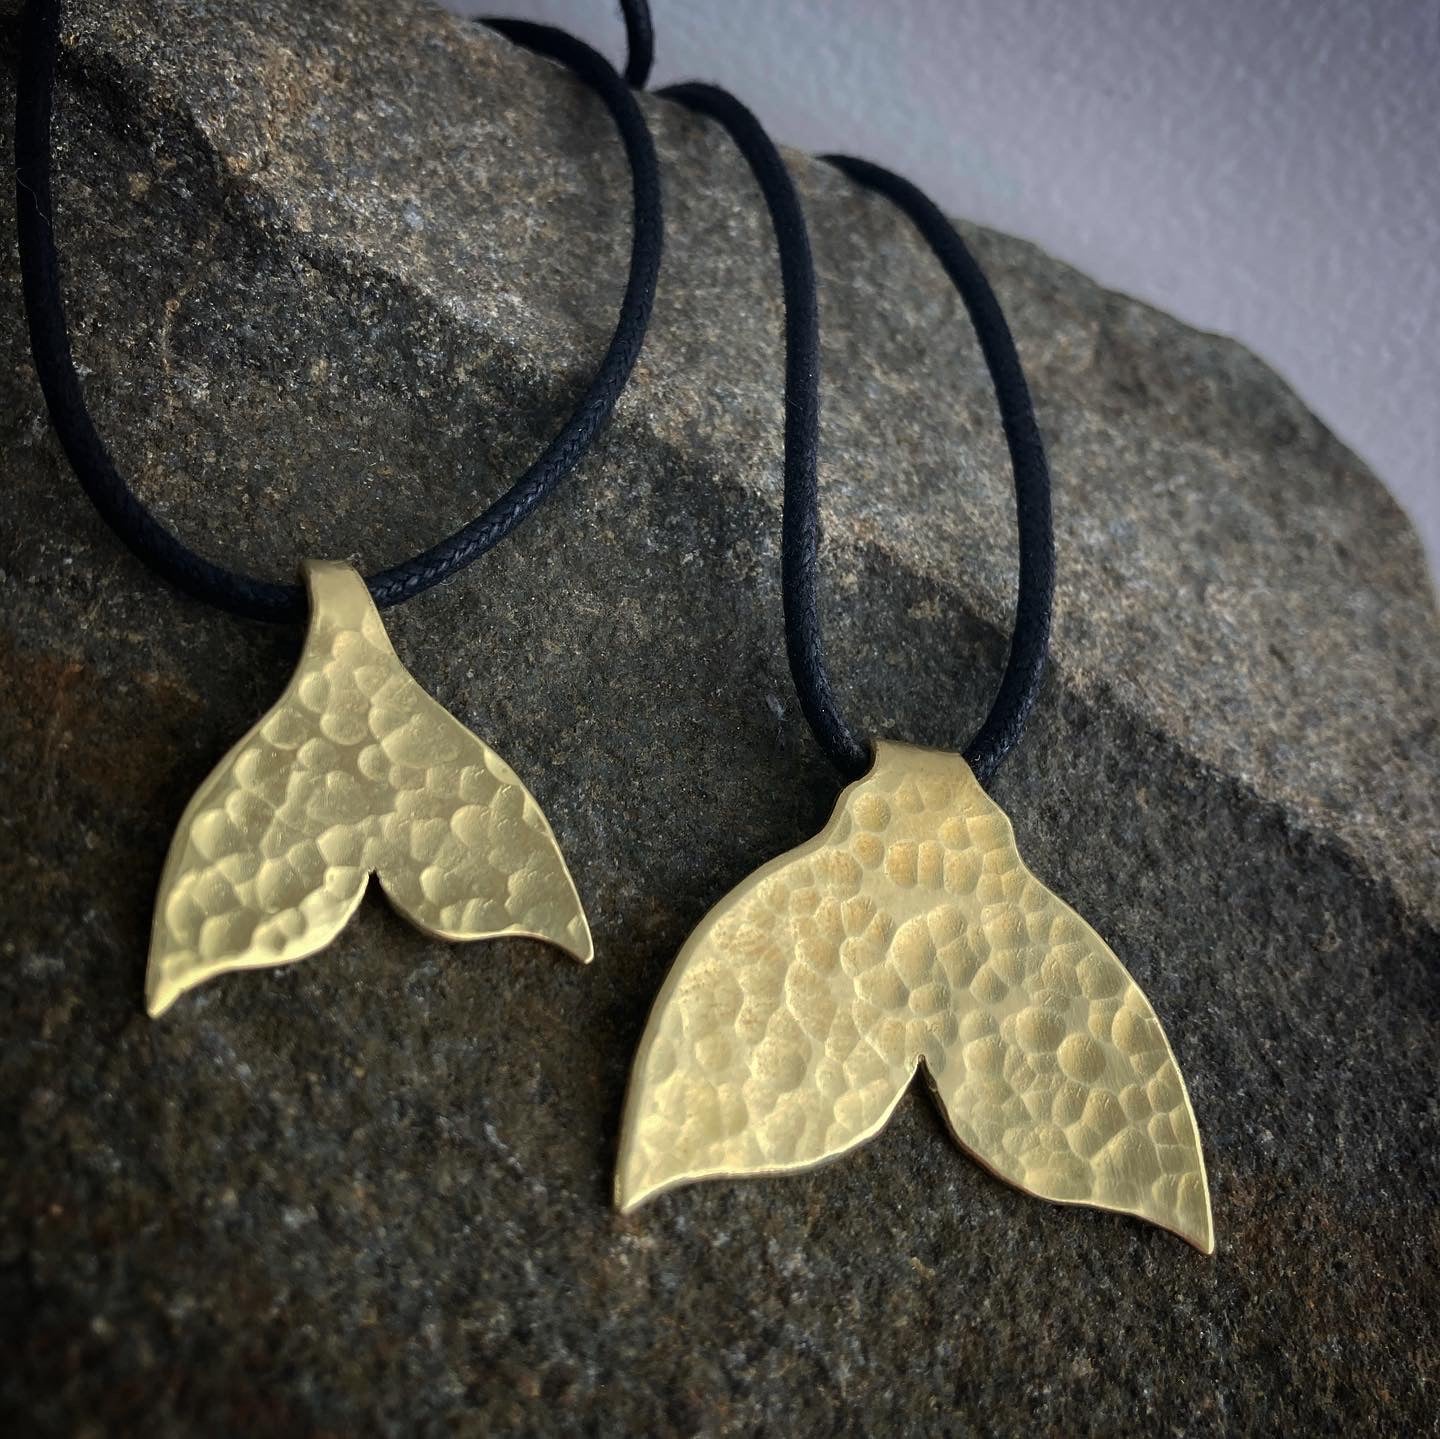 The golden whale tail pendants